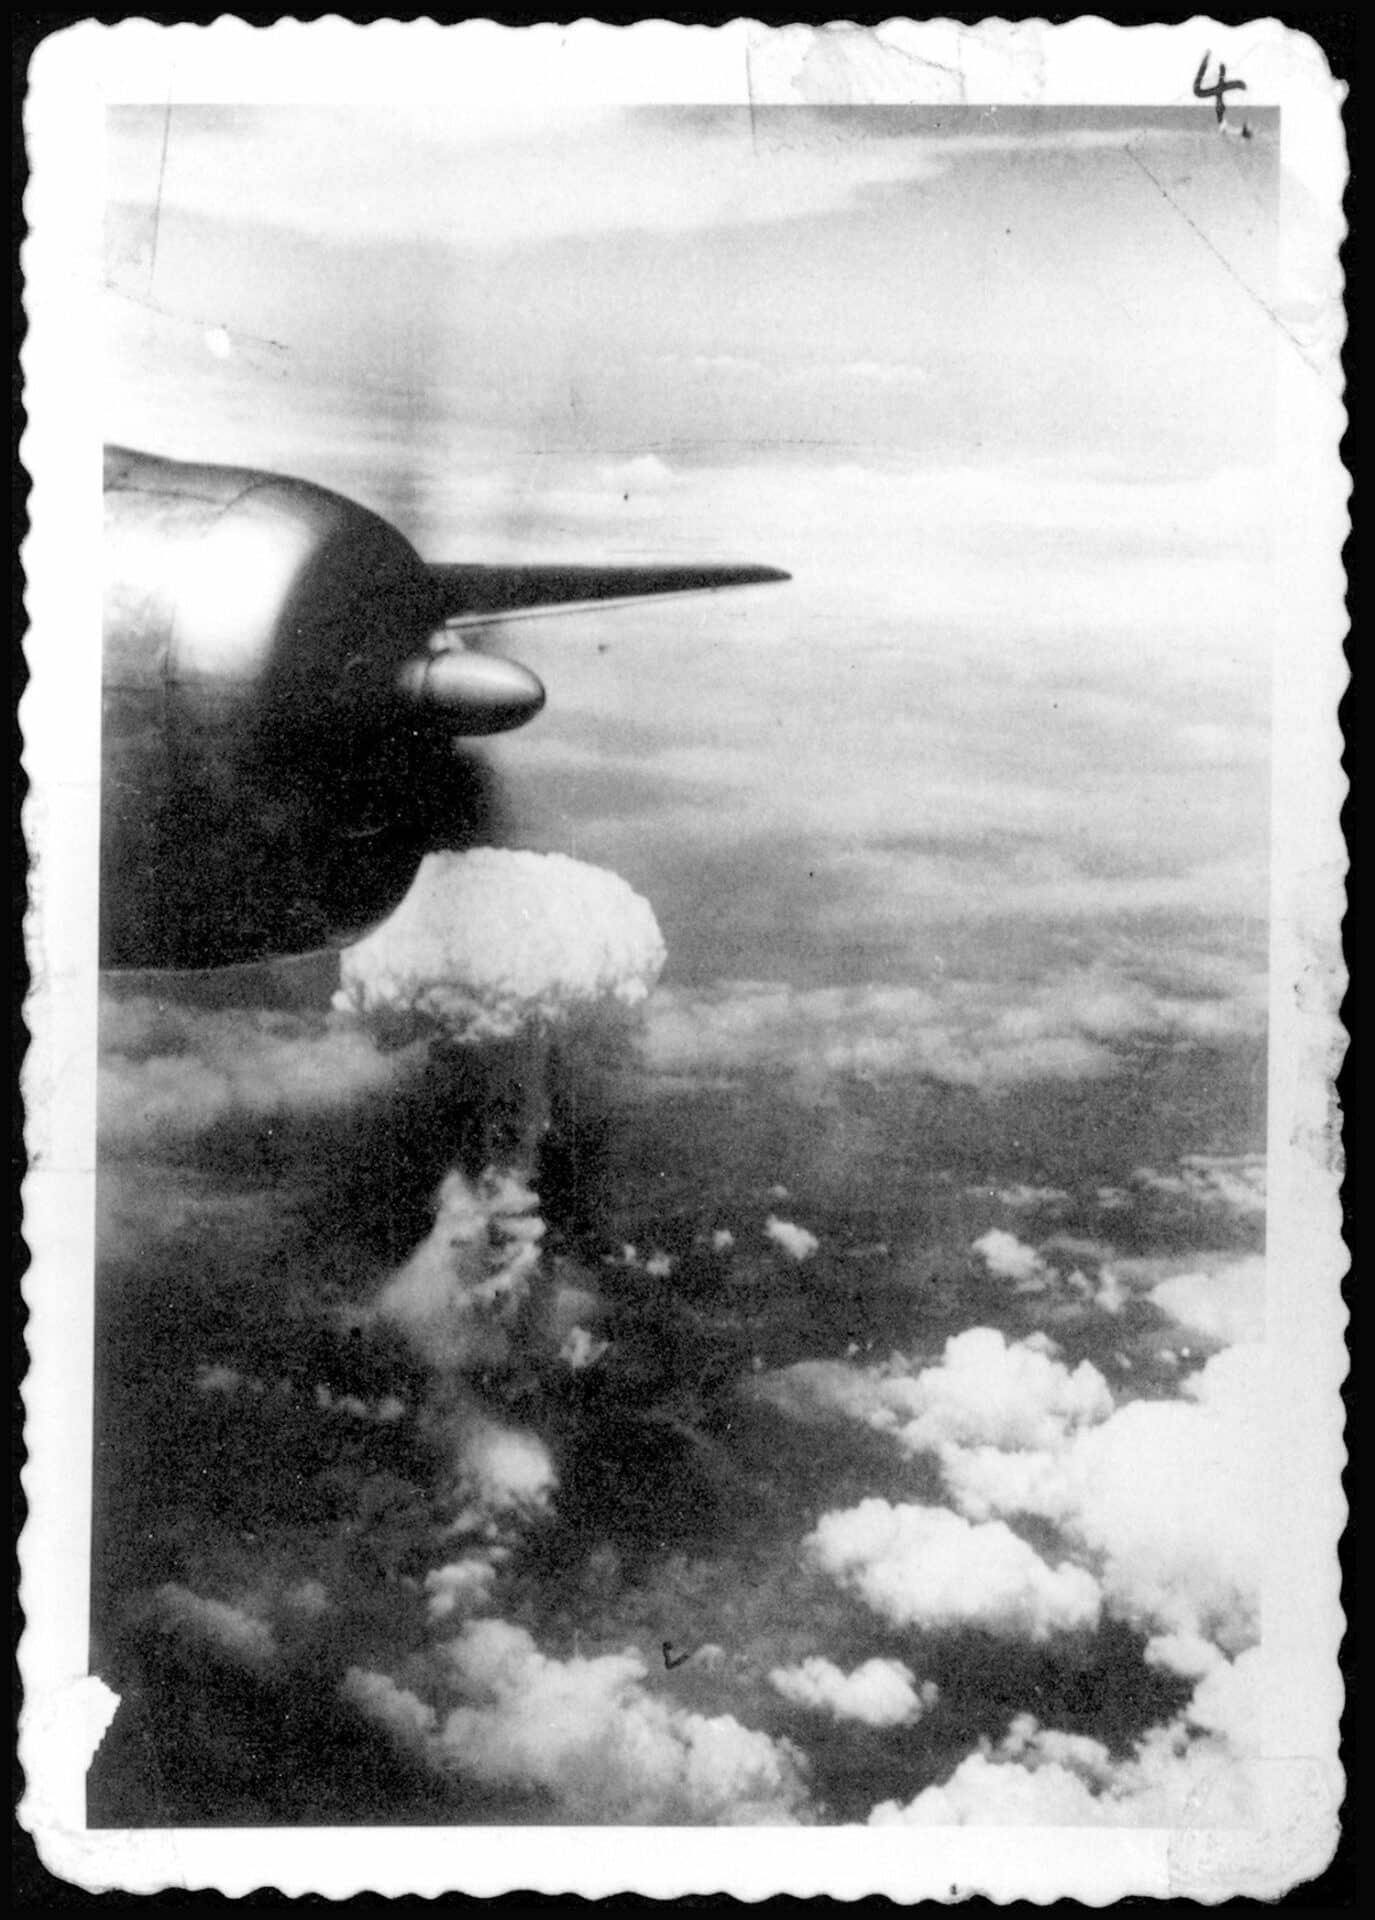 When Bockscar finally made it to the target site—the city of Nokumura—it was covered by fog, haze, and possibly a smokescreen created by the Japanese burning of coal tar. The crew had to make a visual drop; they tried three times, then gave up and went to their alternate target: Nagasaki. That, too, was covered by cloud, until a gap suddenly appeared. The bombardier released the Fat Man atomic bomb over Nagasaki, and at 12:02 pm on August 9, 1945, it exploded at an altitude of 1,840 feet with a force equal to about 22,000 tons of TNT. Unfortunately, with no photo plane, the only images that were available were those taken with an amateur camera smuggled aboard Bockscar. Photo courtesy of Los Alamos National Laboratory.